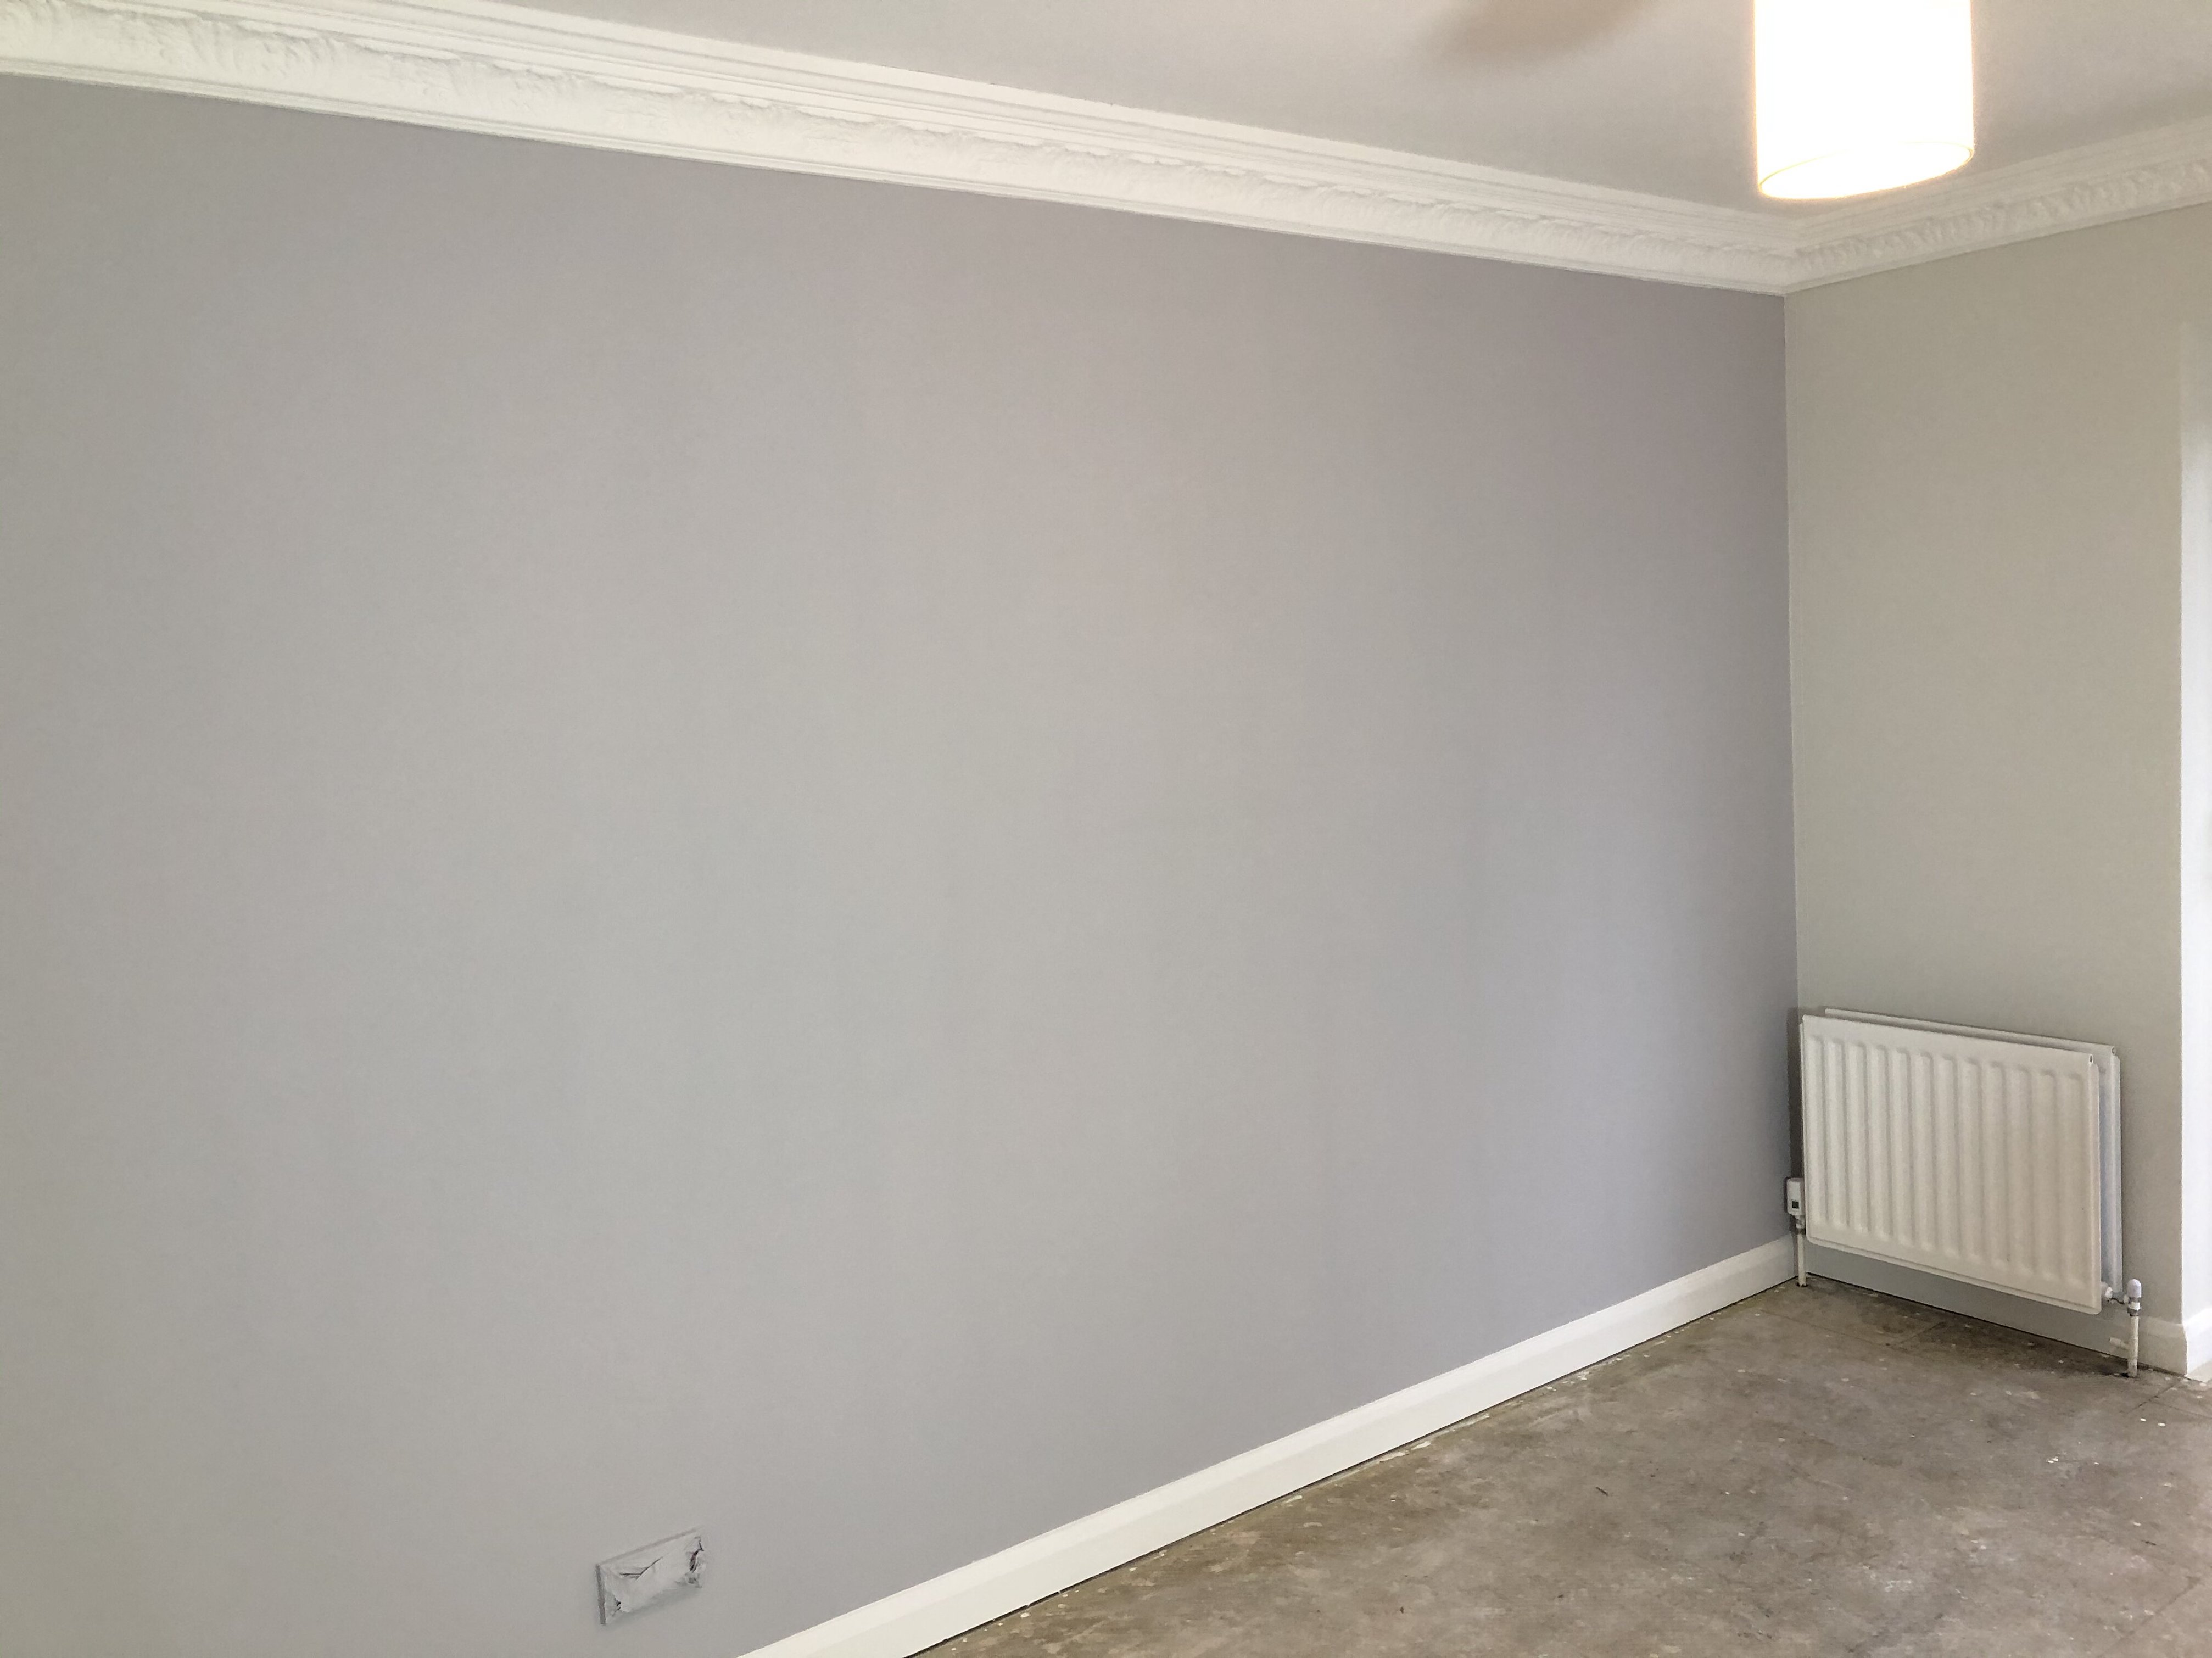 wallpaper_removal_and_hanging